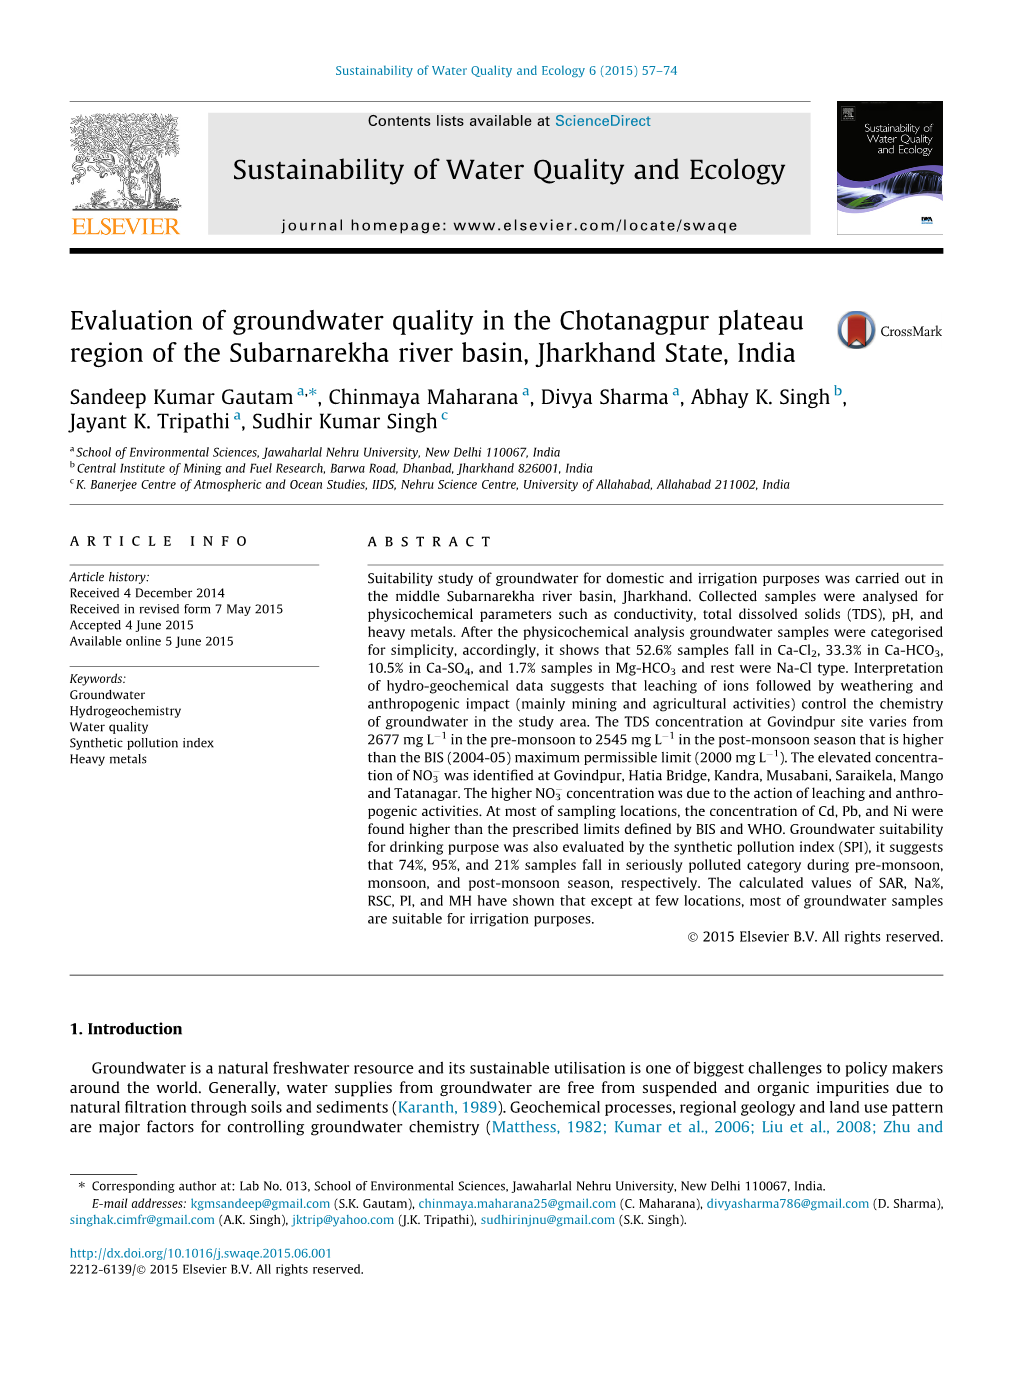 Evaluation of Groundwater Quality in the Chotanagpur Plateau Region Of